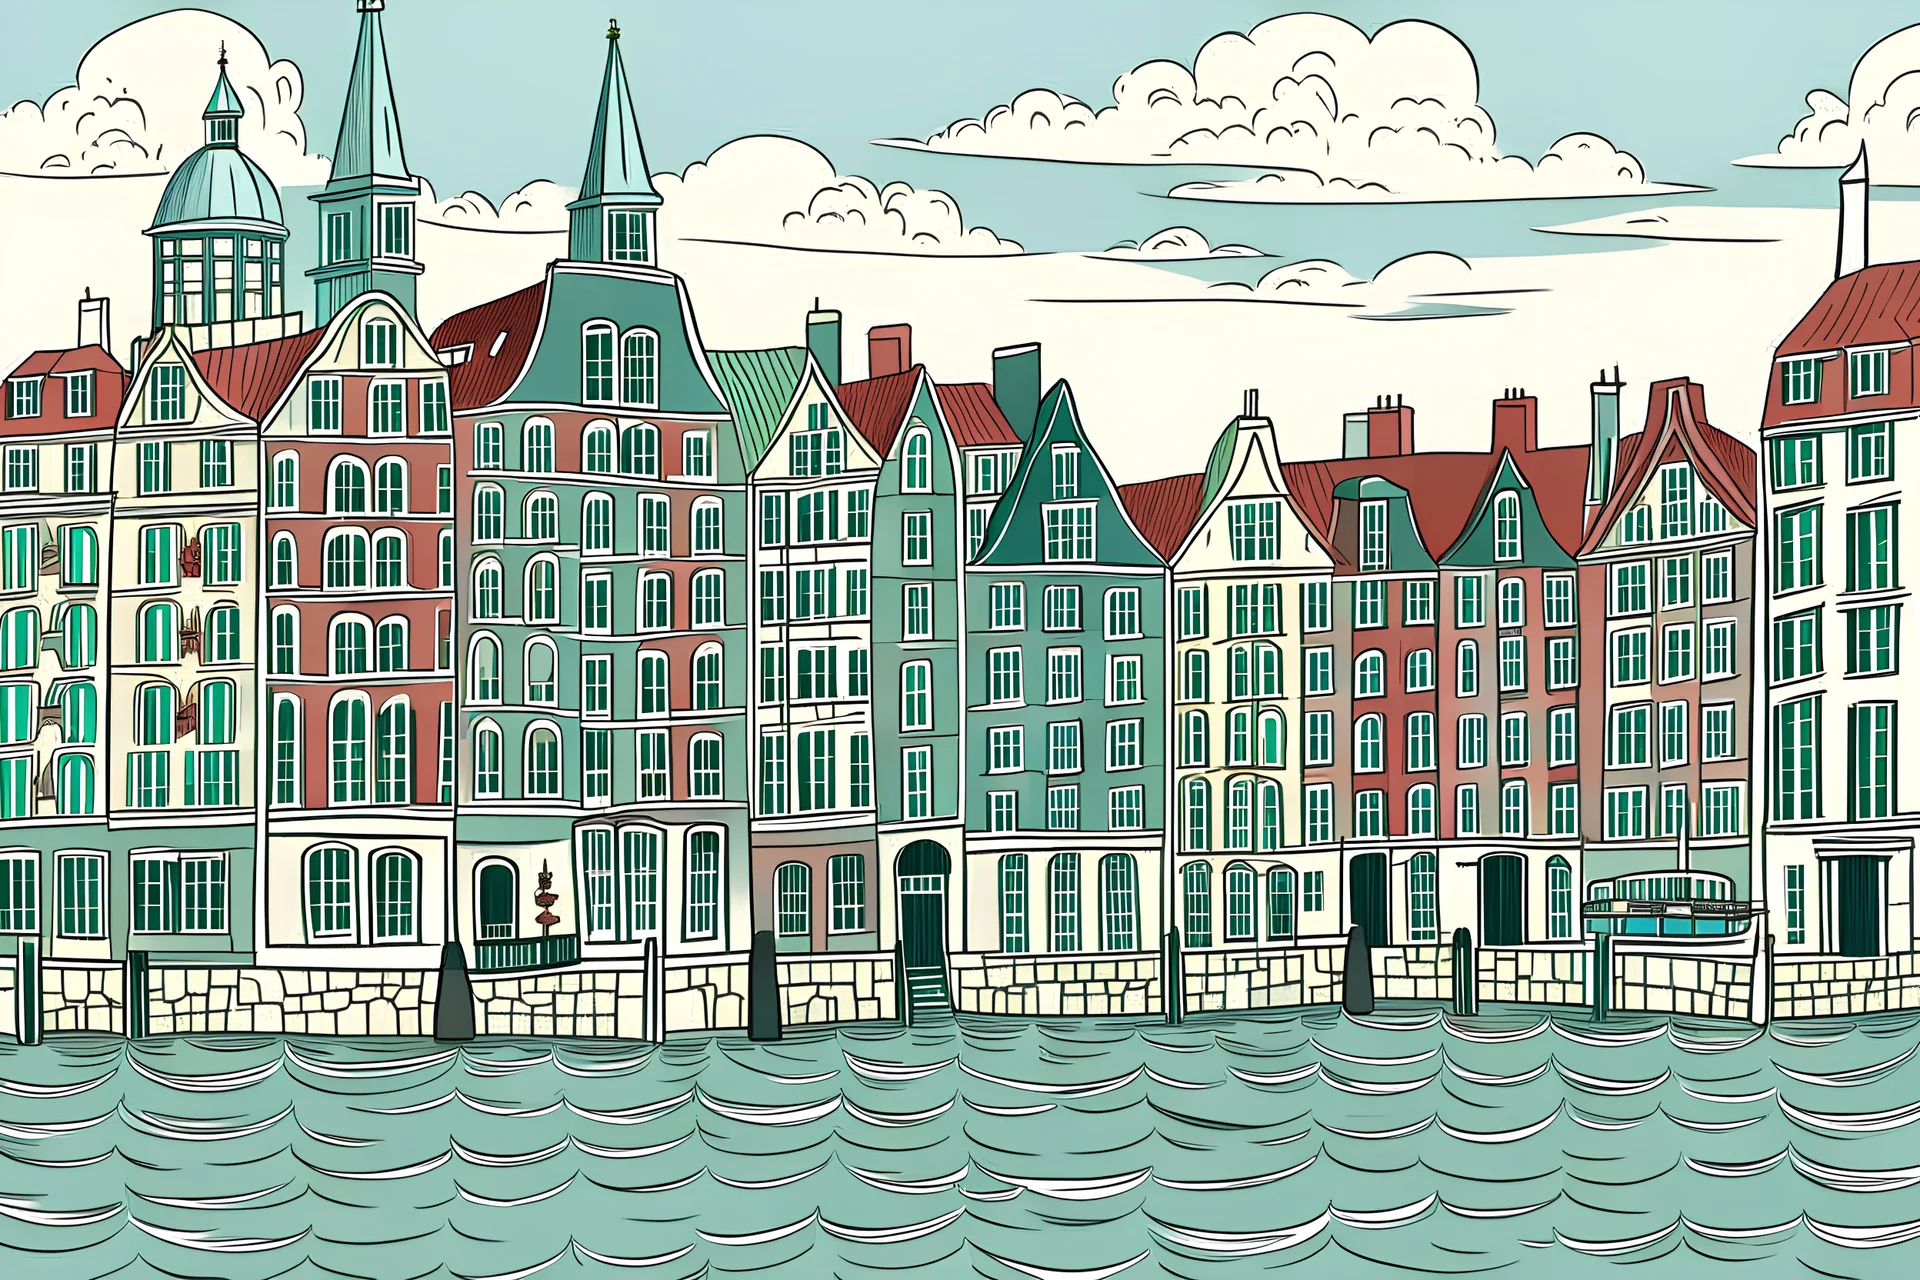 Imagine a modern poster inspered drawing of representative buildings of the danish cities copenhagen roskile and hillerød. The representative buildings should be placed on a simple 2D map og northern sealand in danmark